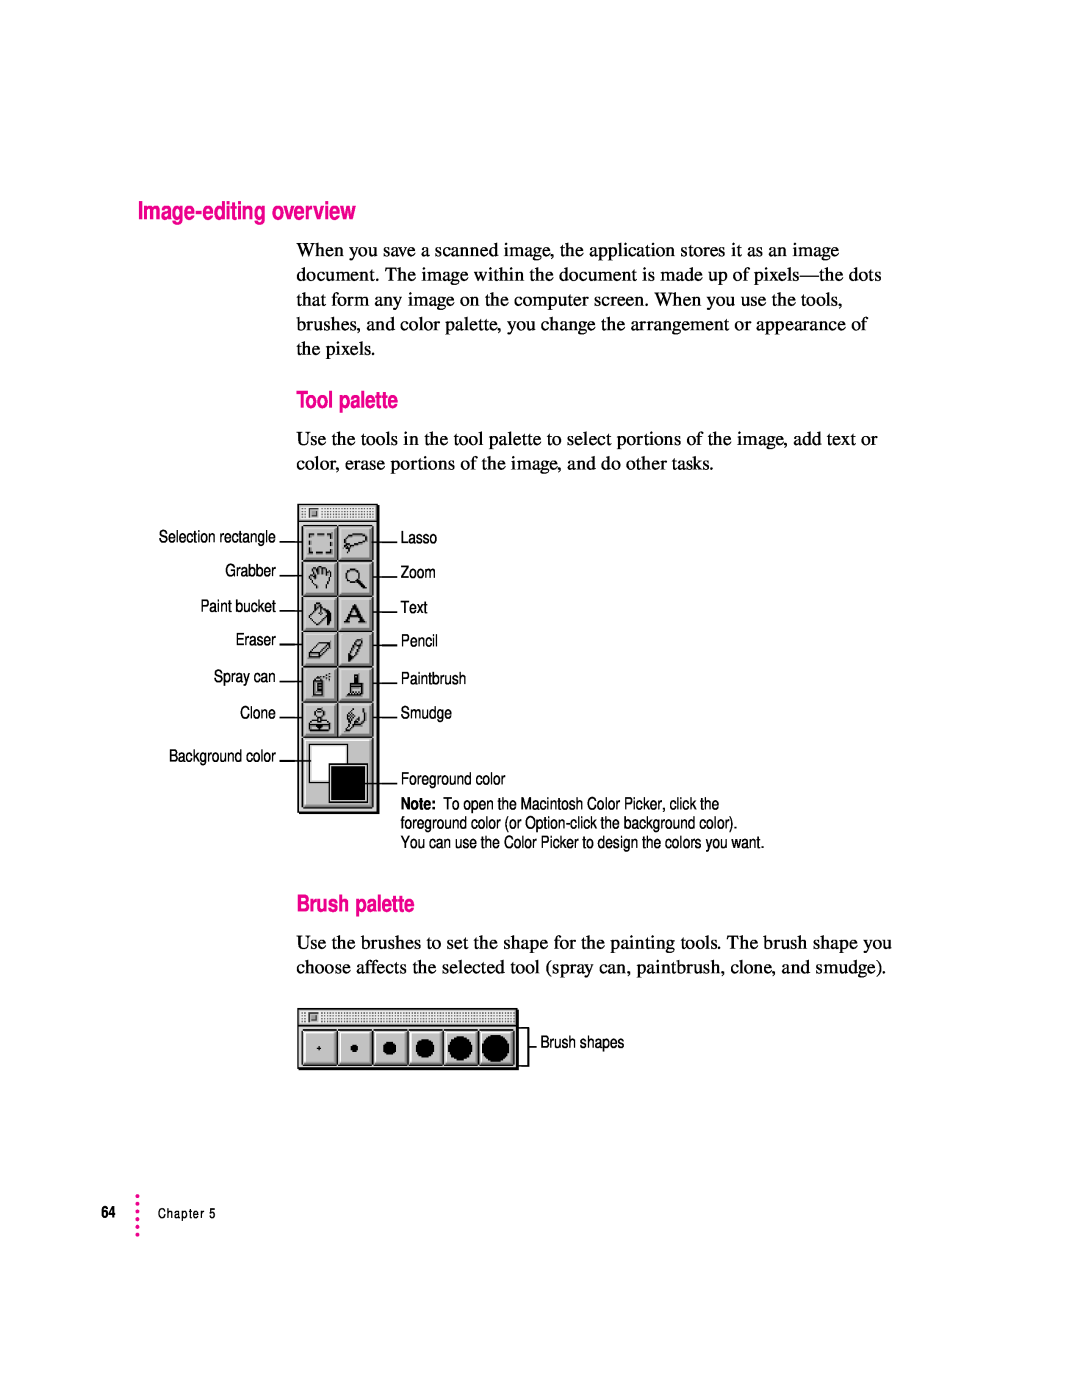 Apple 627, 1230 user manual Image-editing overview, Tool palette, Brush palette 